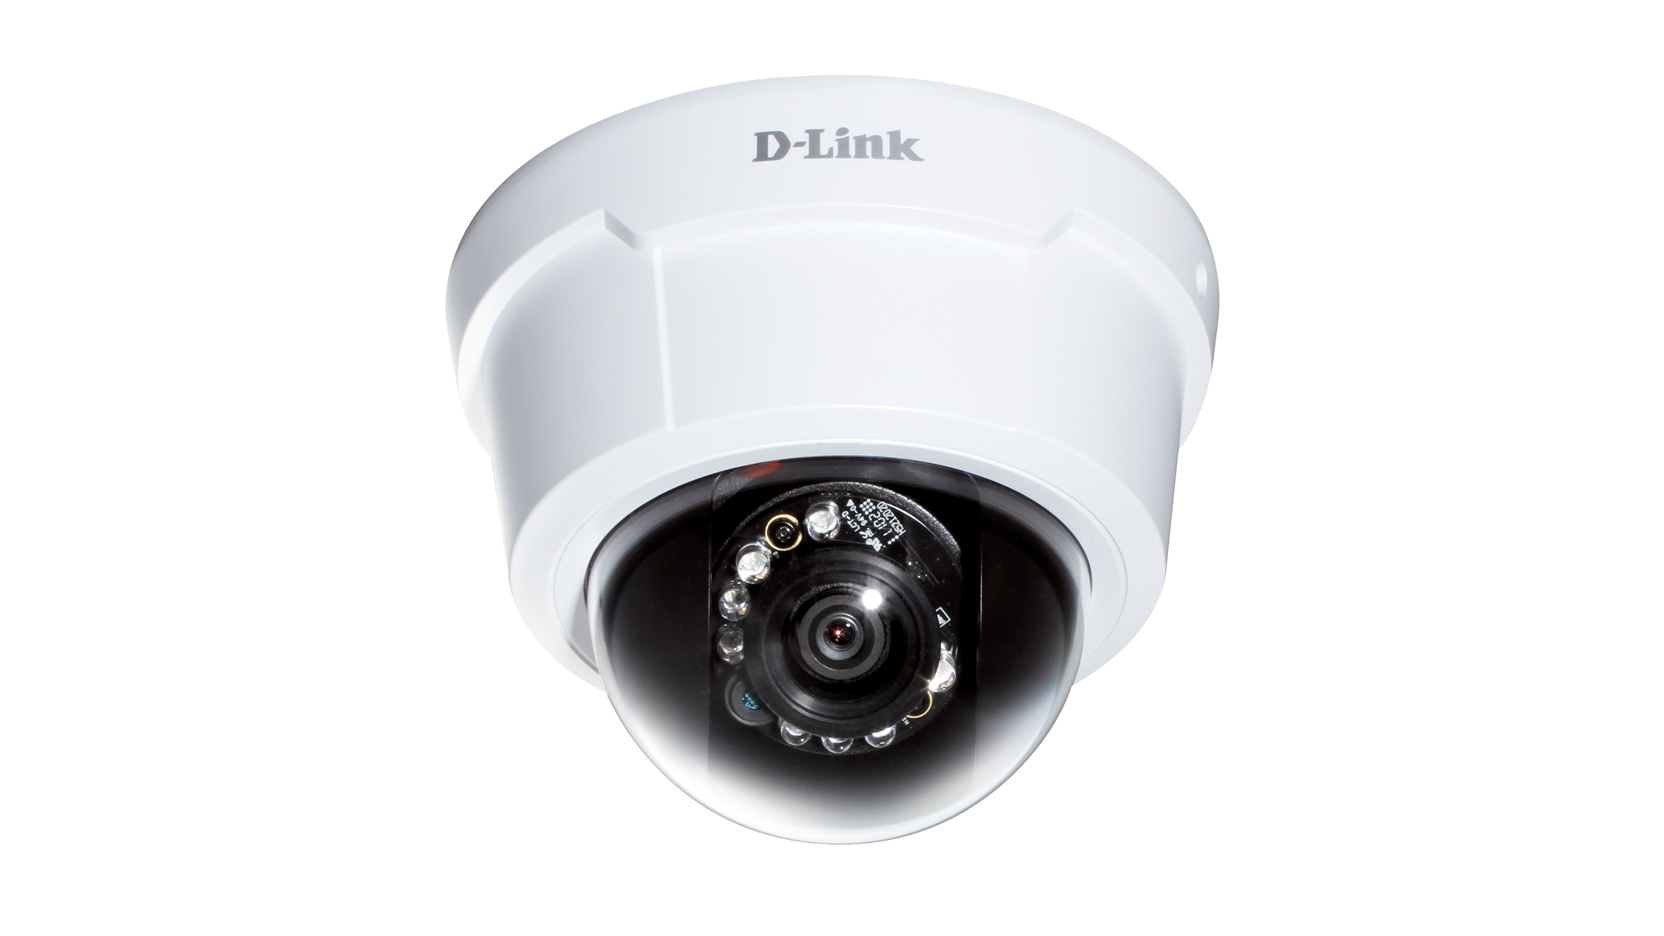 DCS-6113 Full HD PoE Day/Night Fixed Dome Network Camera | D-Link UK